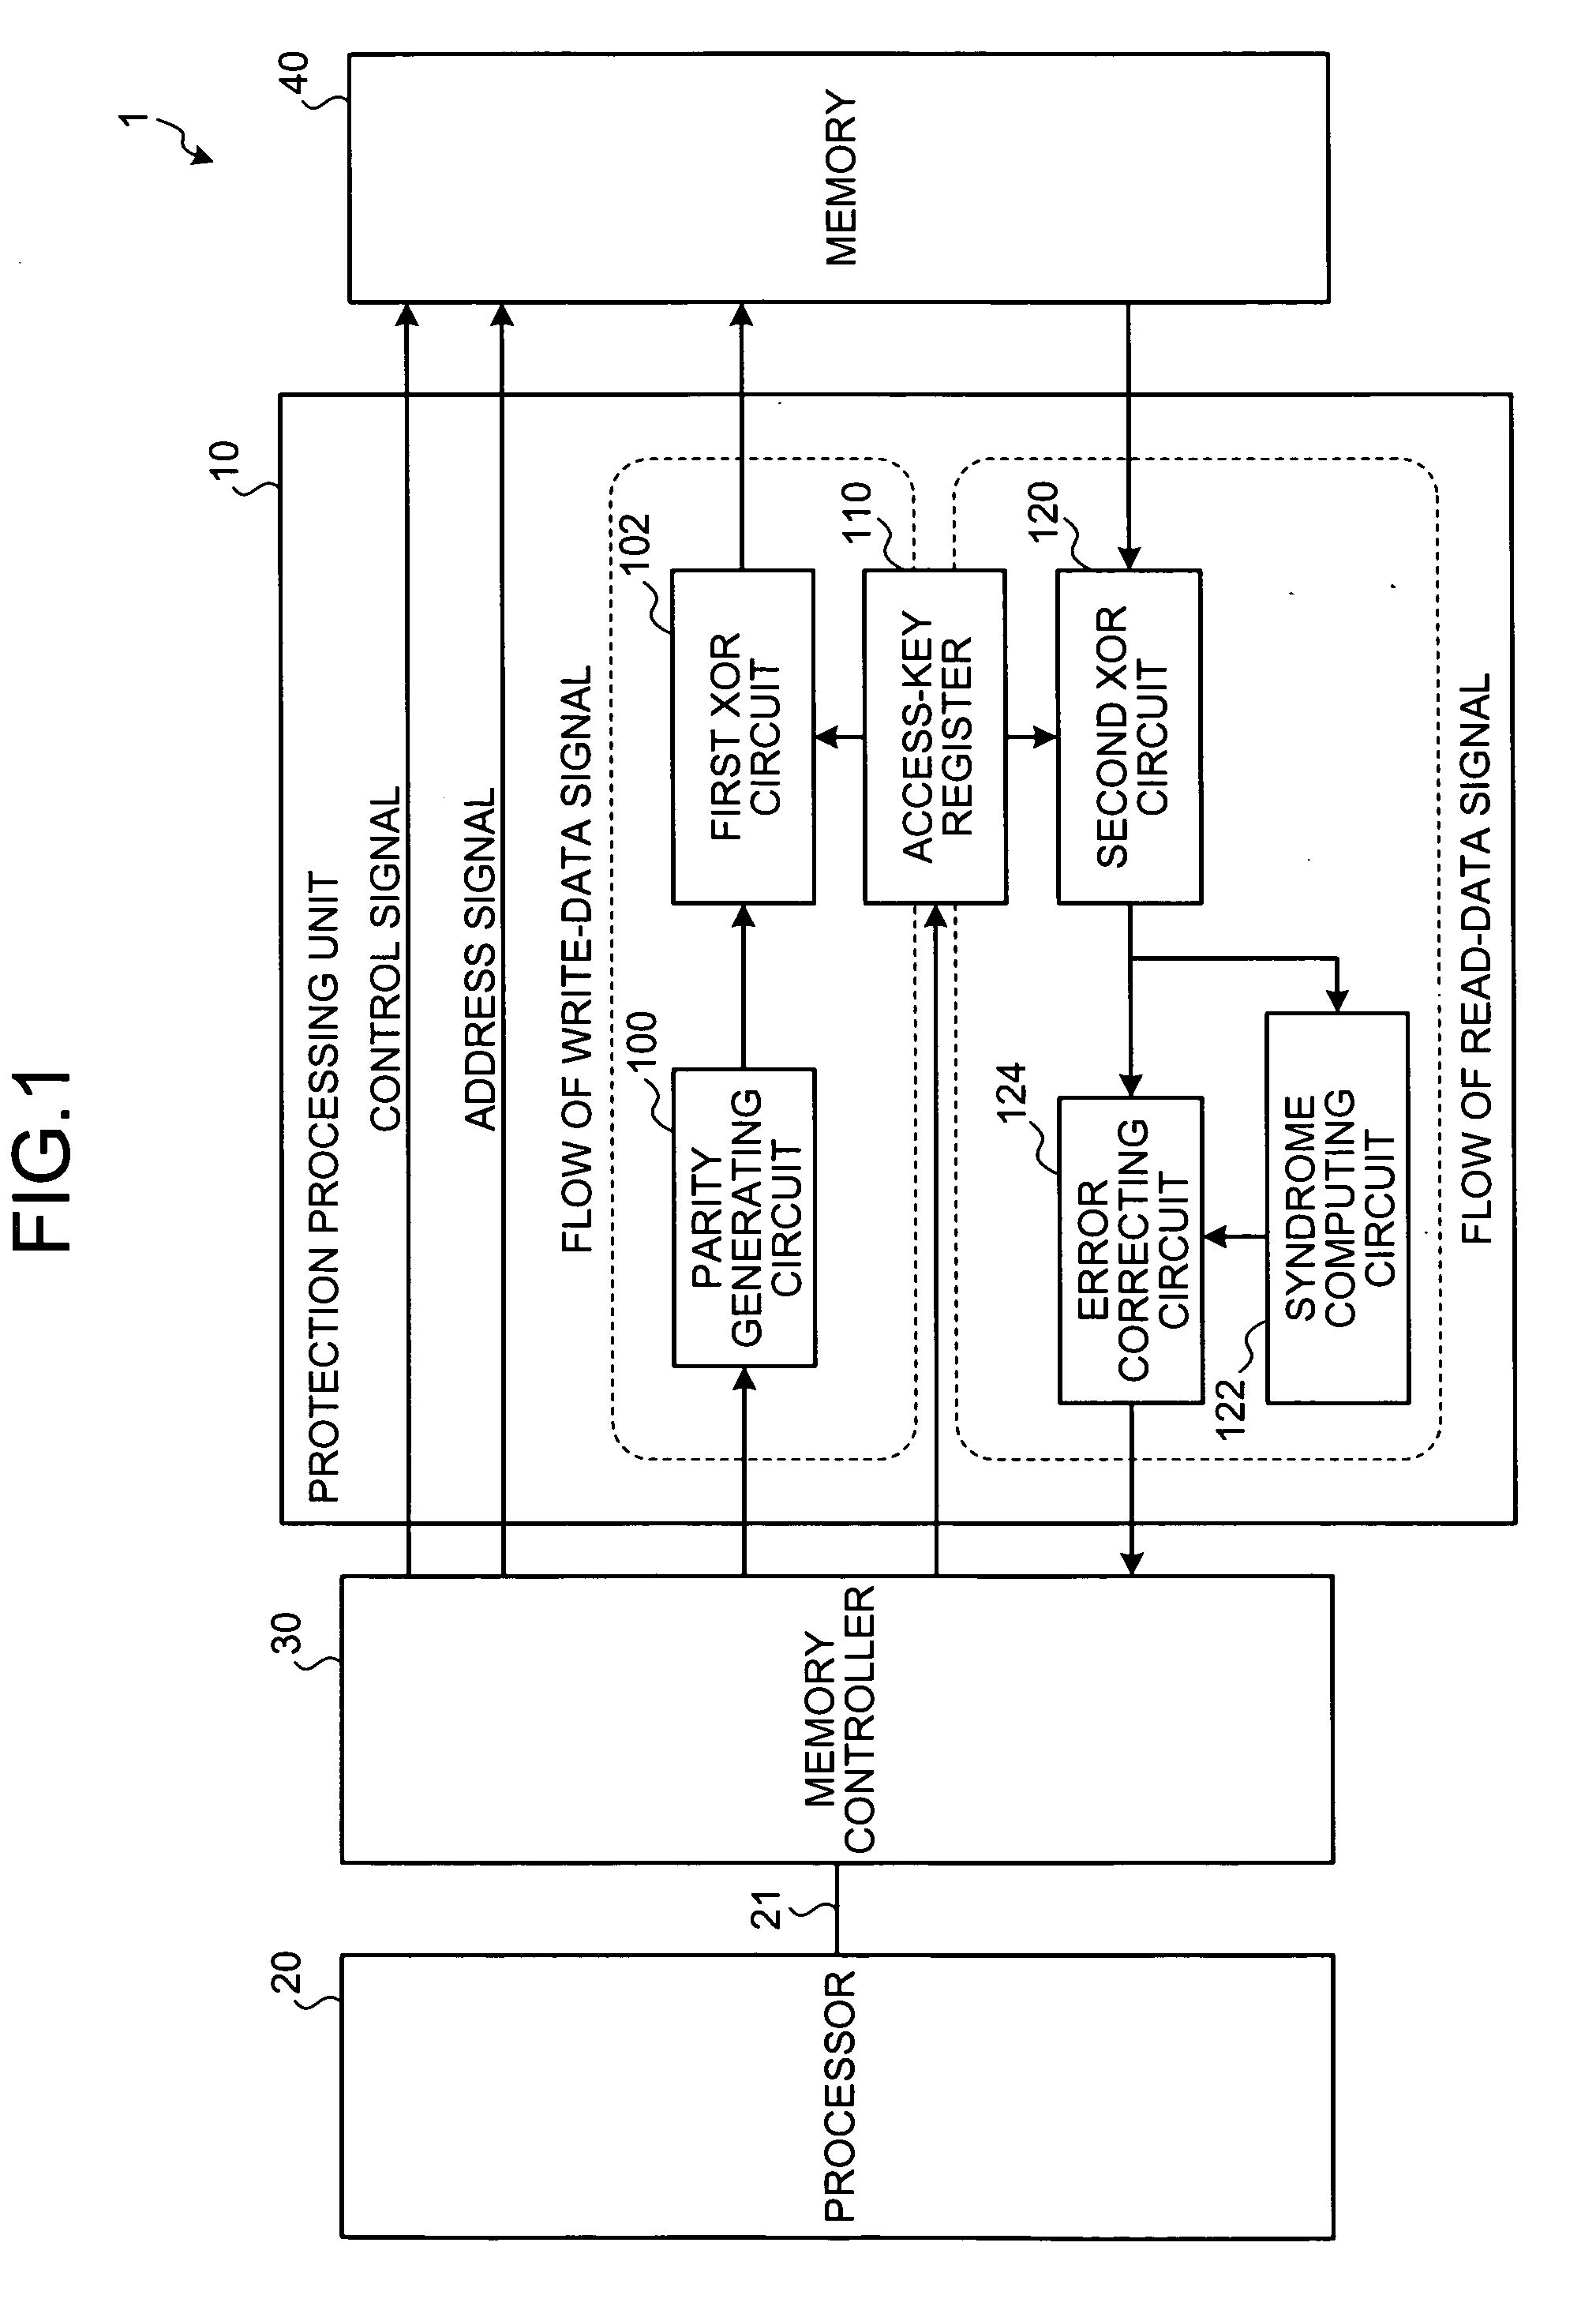 Method, apparatus, and system for protecting memory